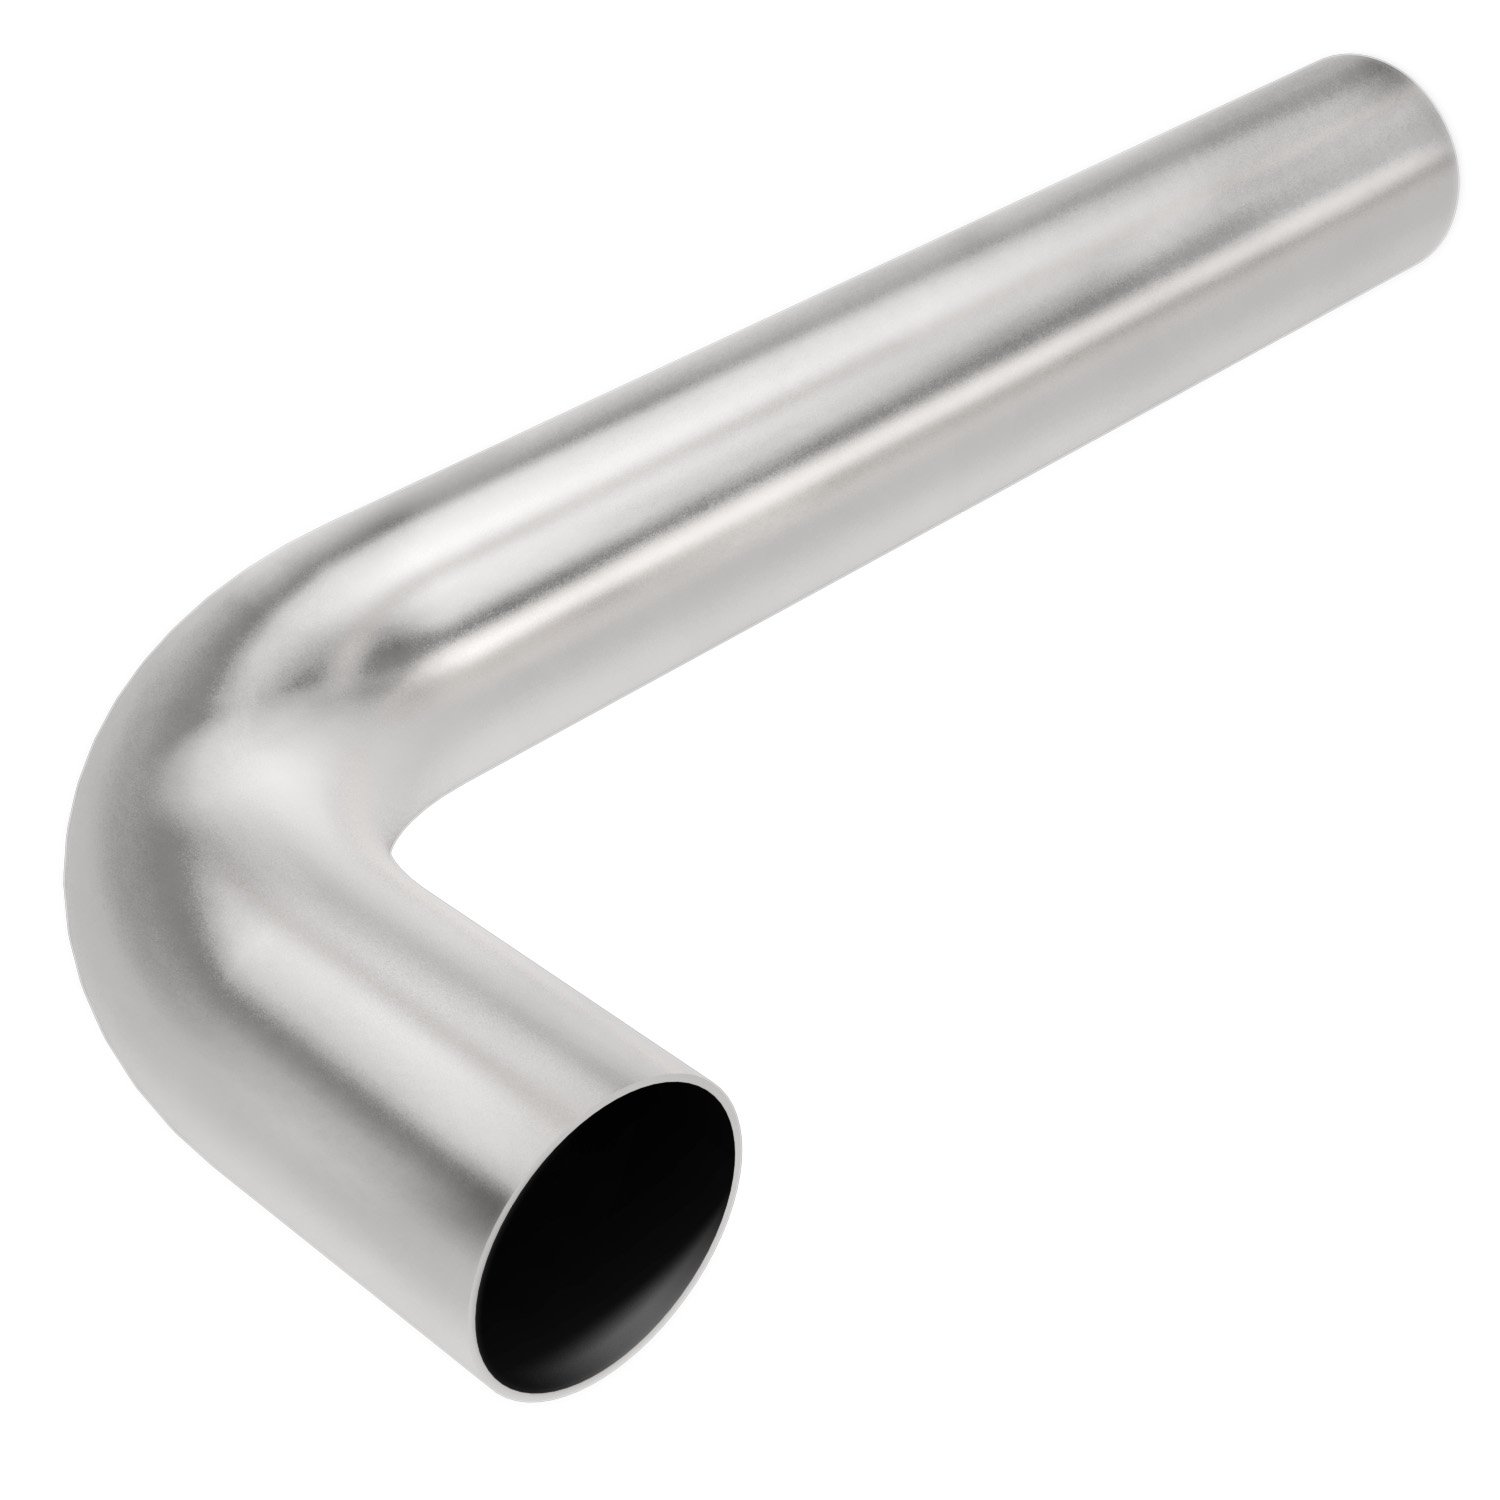 Stainless Steel 90° Transition Exhaust Pipe Outside Diameter: 2.5"